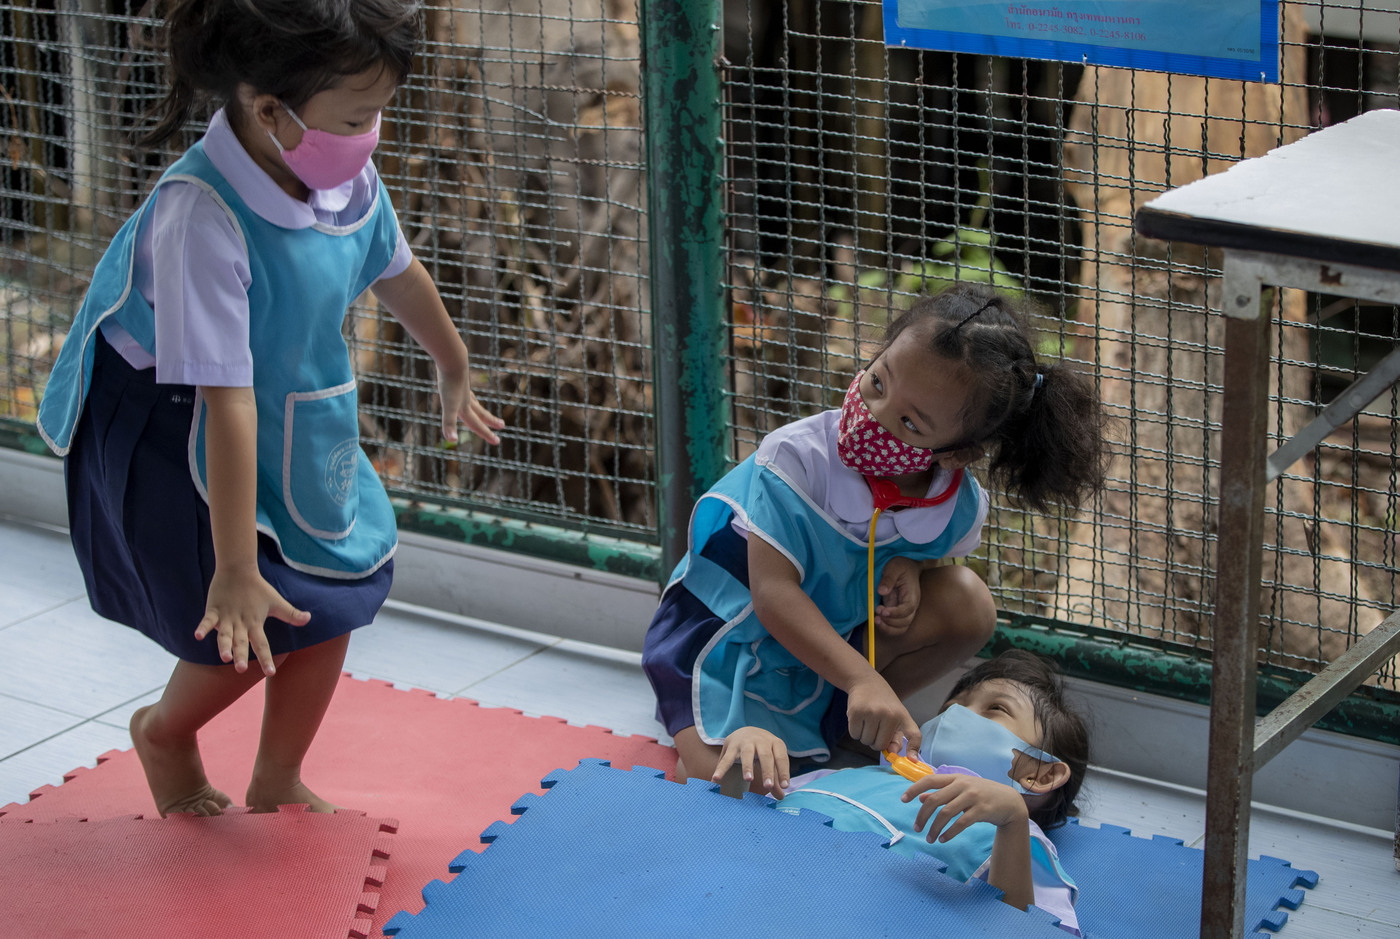 Children play at Makkasan preschool in Bangkok, Thailand, Wednesday, July 1, 2020. Thailand has begun a fifth phase of relaxations of COVID-19 restrictions, allowing the reopening of schools and high-risk entertainment venues such as pubs and massage parlors that had been shut since mid-March. (AP Photo/ Gemunu Amarasinghe)